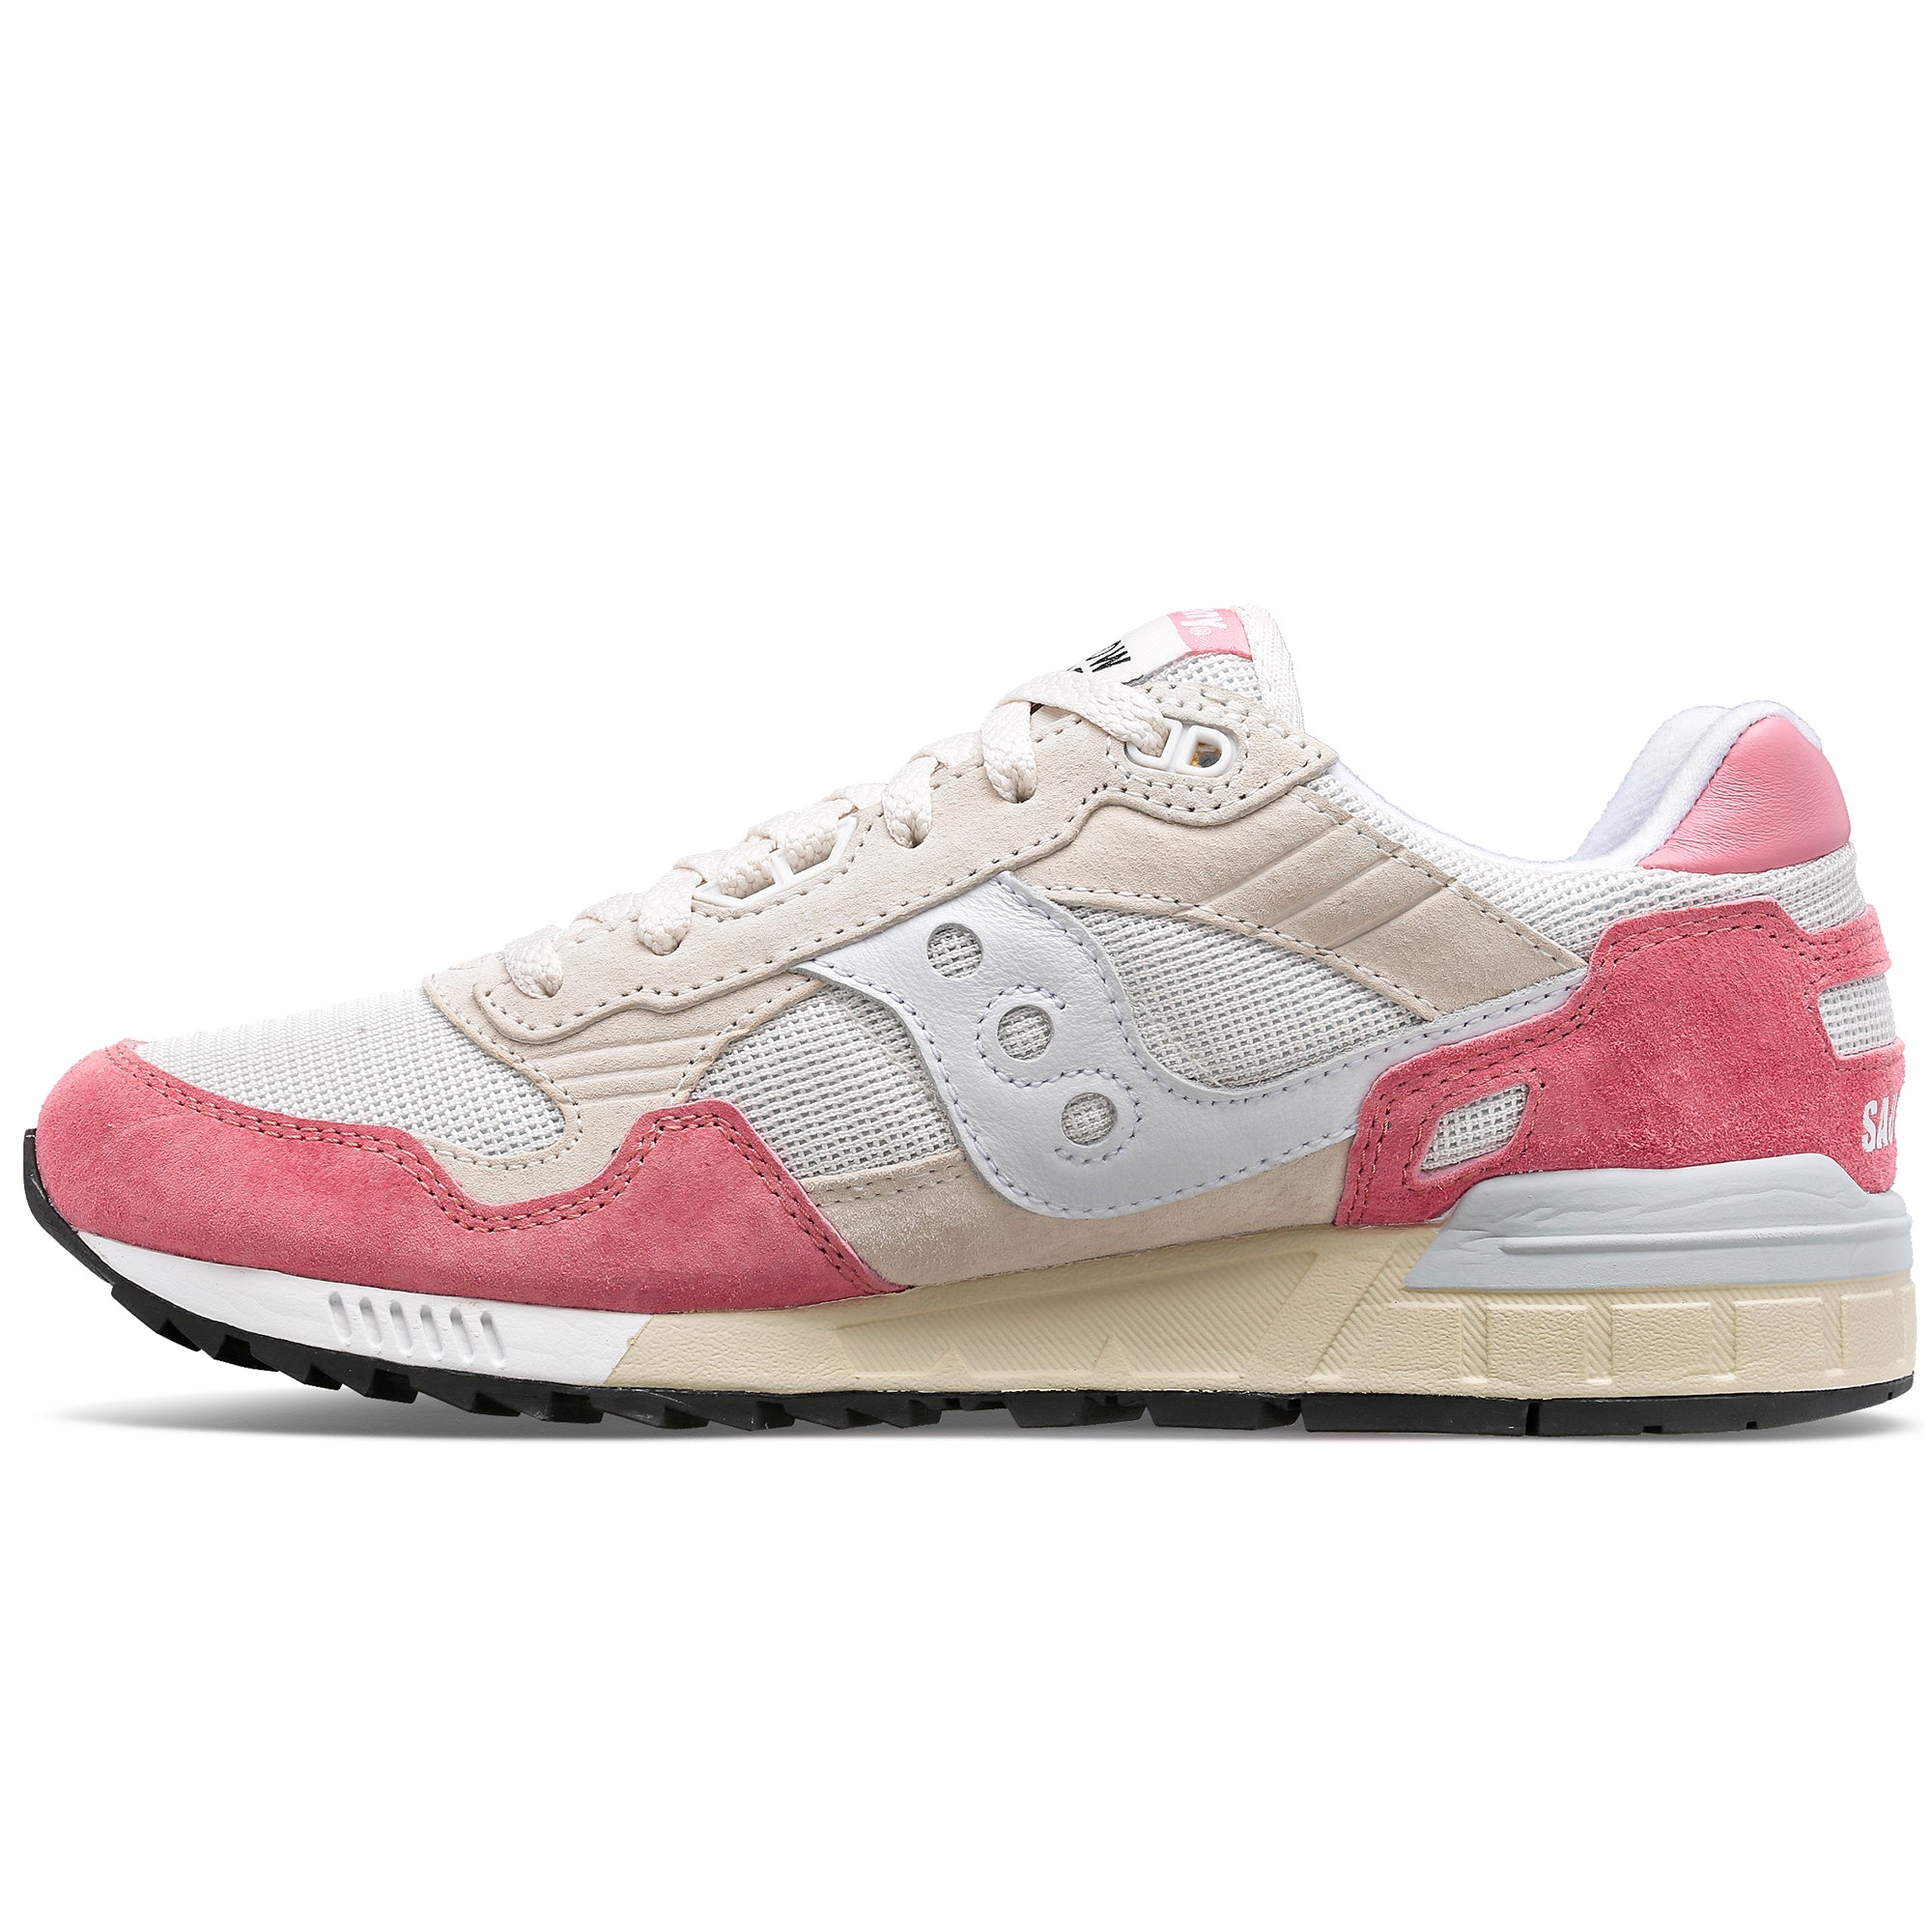 Saucony Shadow 5000 Trainers - White/Pink